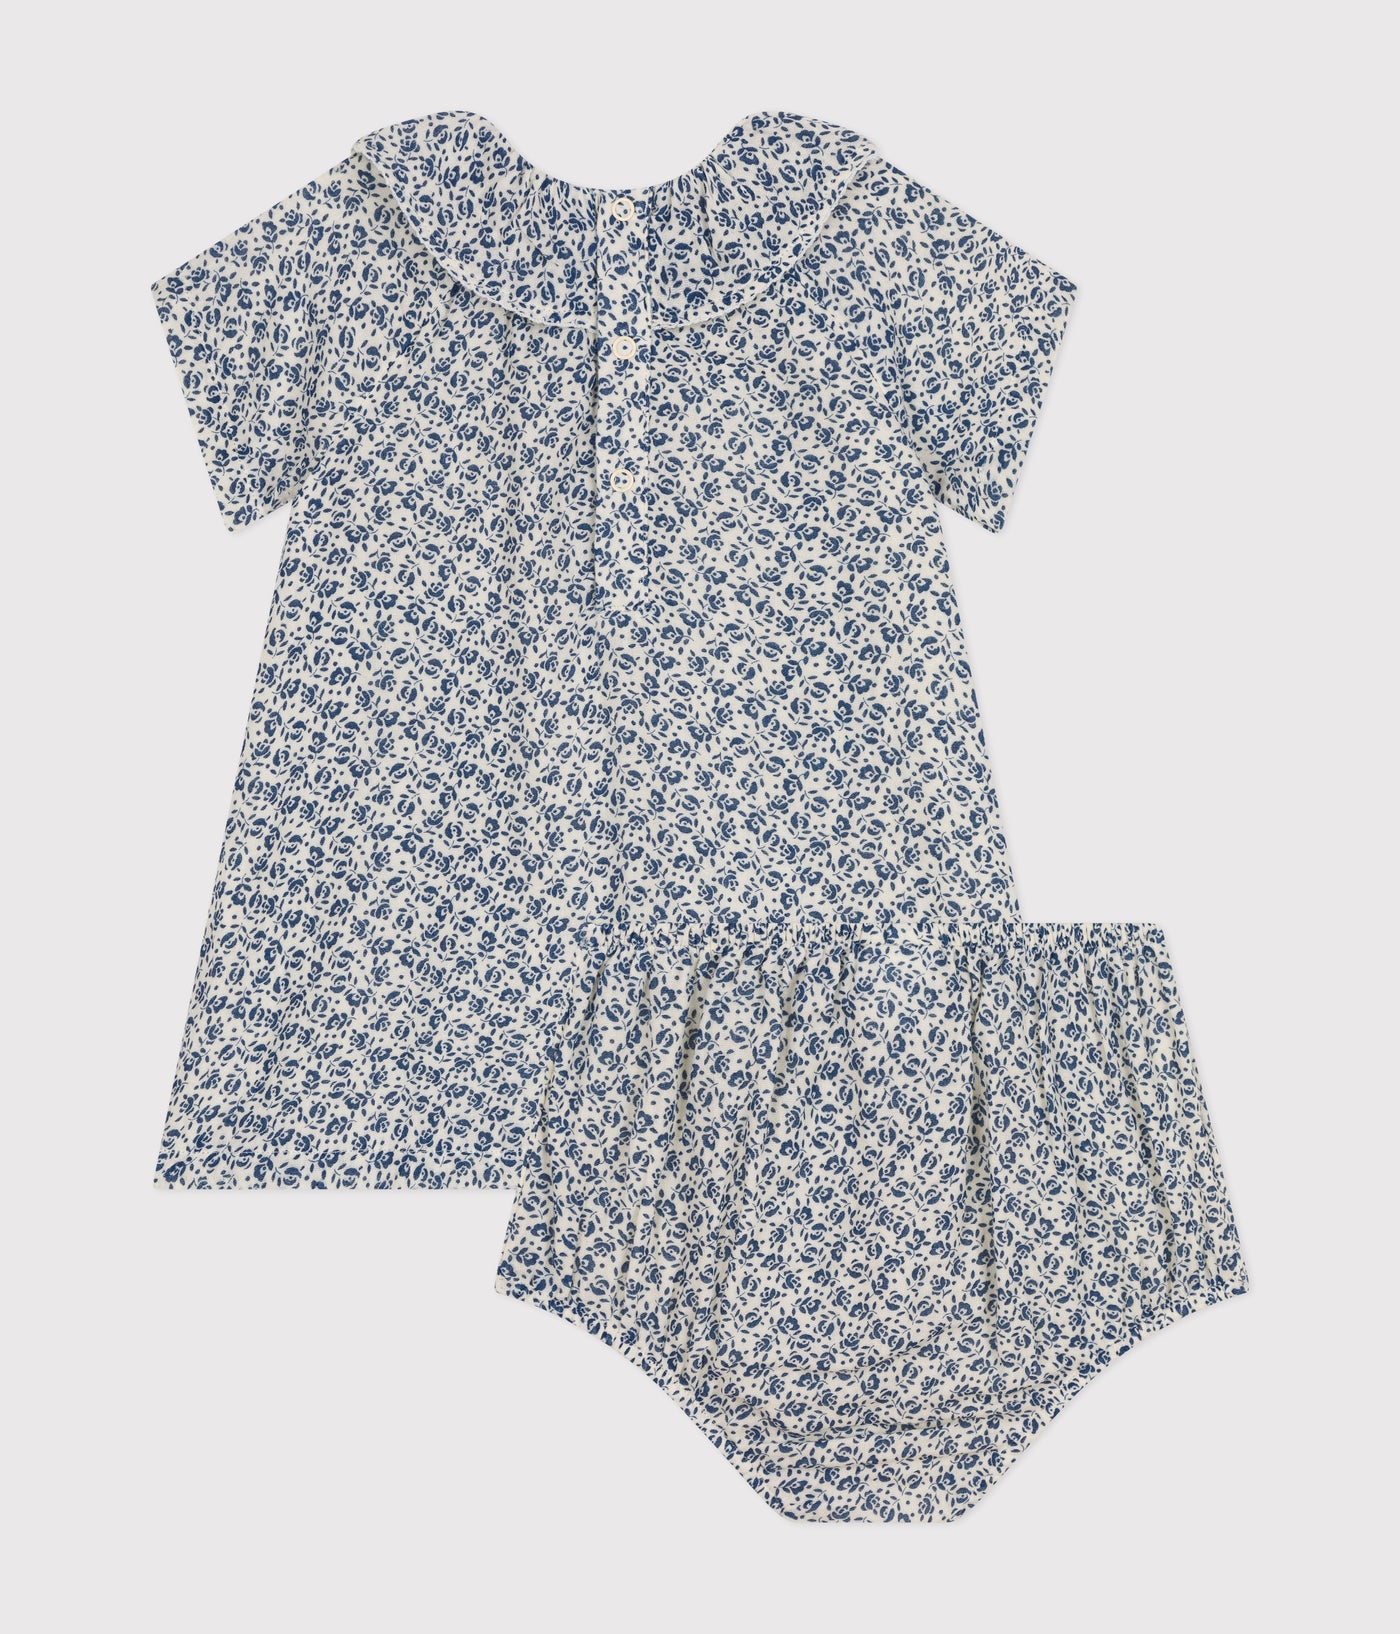 BABIES' COTTON GAUZE SHORT-SLEEVED DRESS AND BLOOMERS